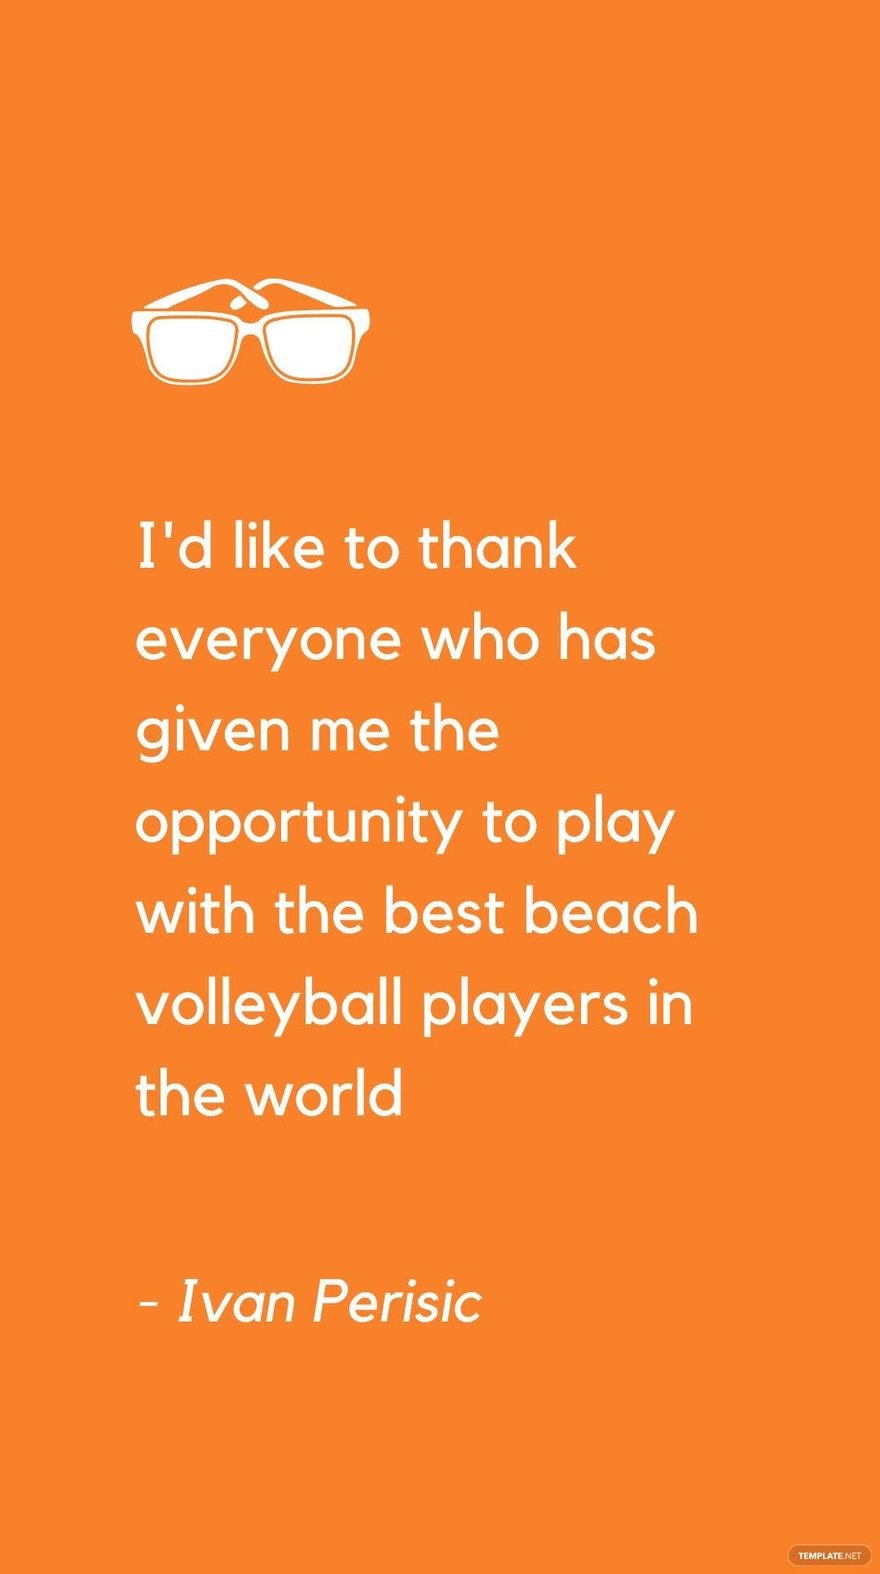 Ivan Perisic - I'd like to thank everyone who has given me the opportunity to play with the best beach volleyball players in the world